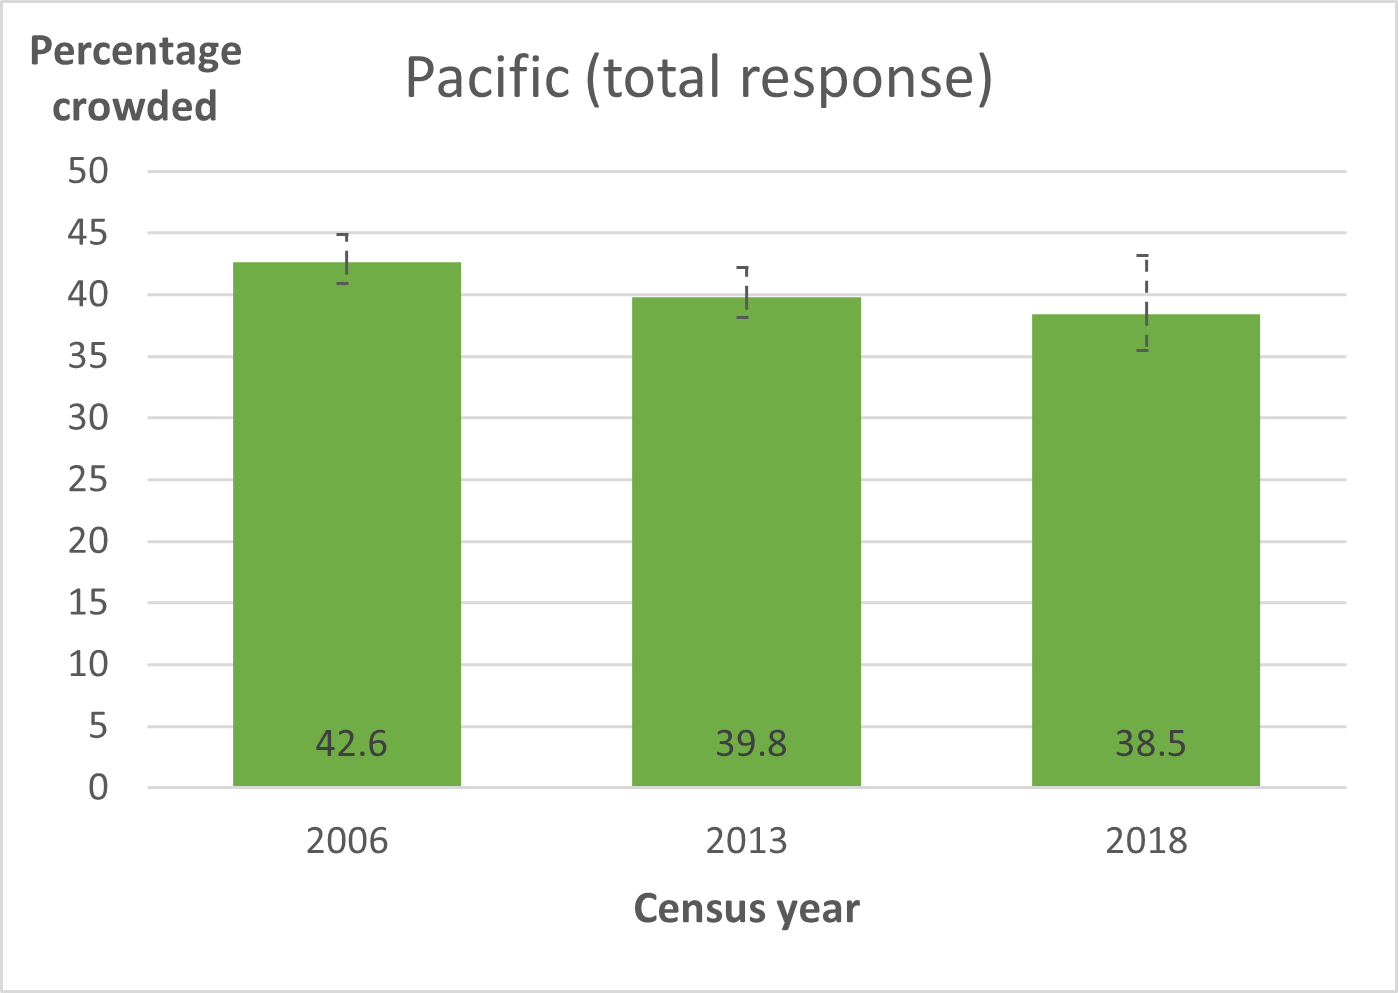 Pacific crowding